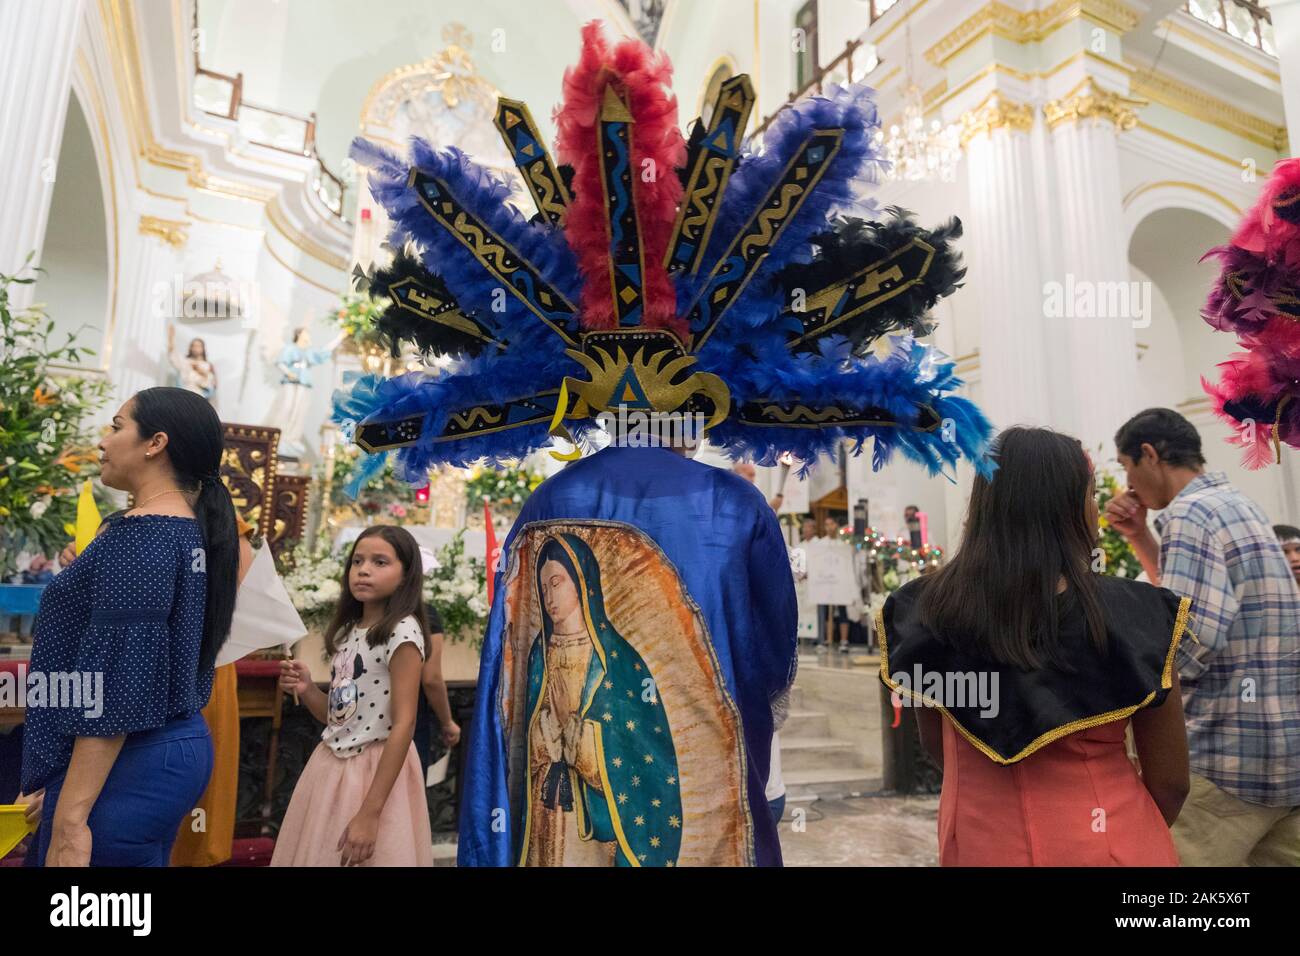 Festival of Our Lady of Guadalupe, indigenous participant in colourful attire Stock Photo